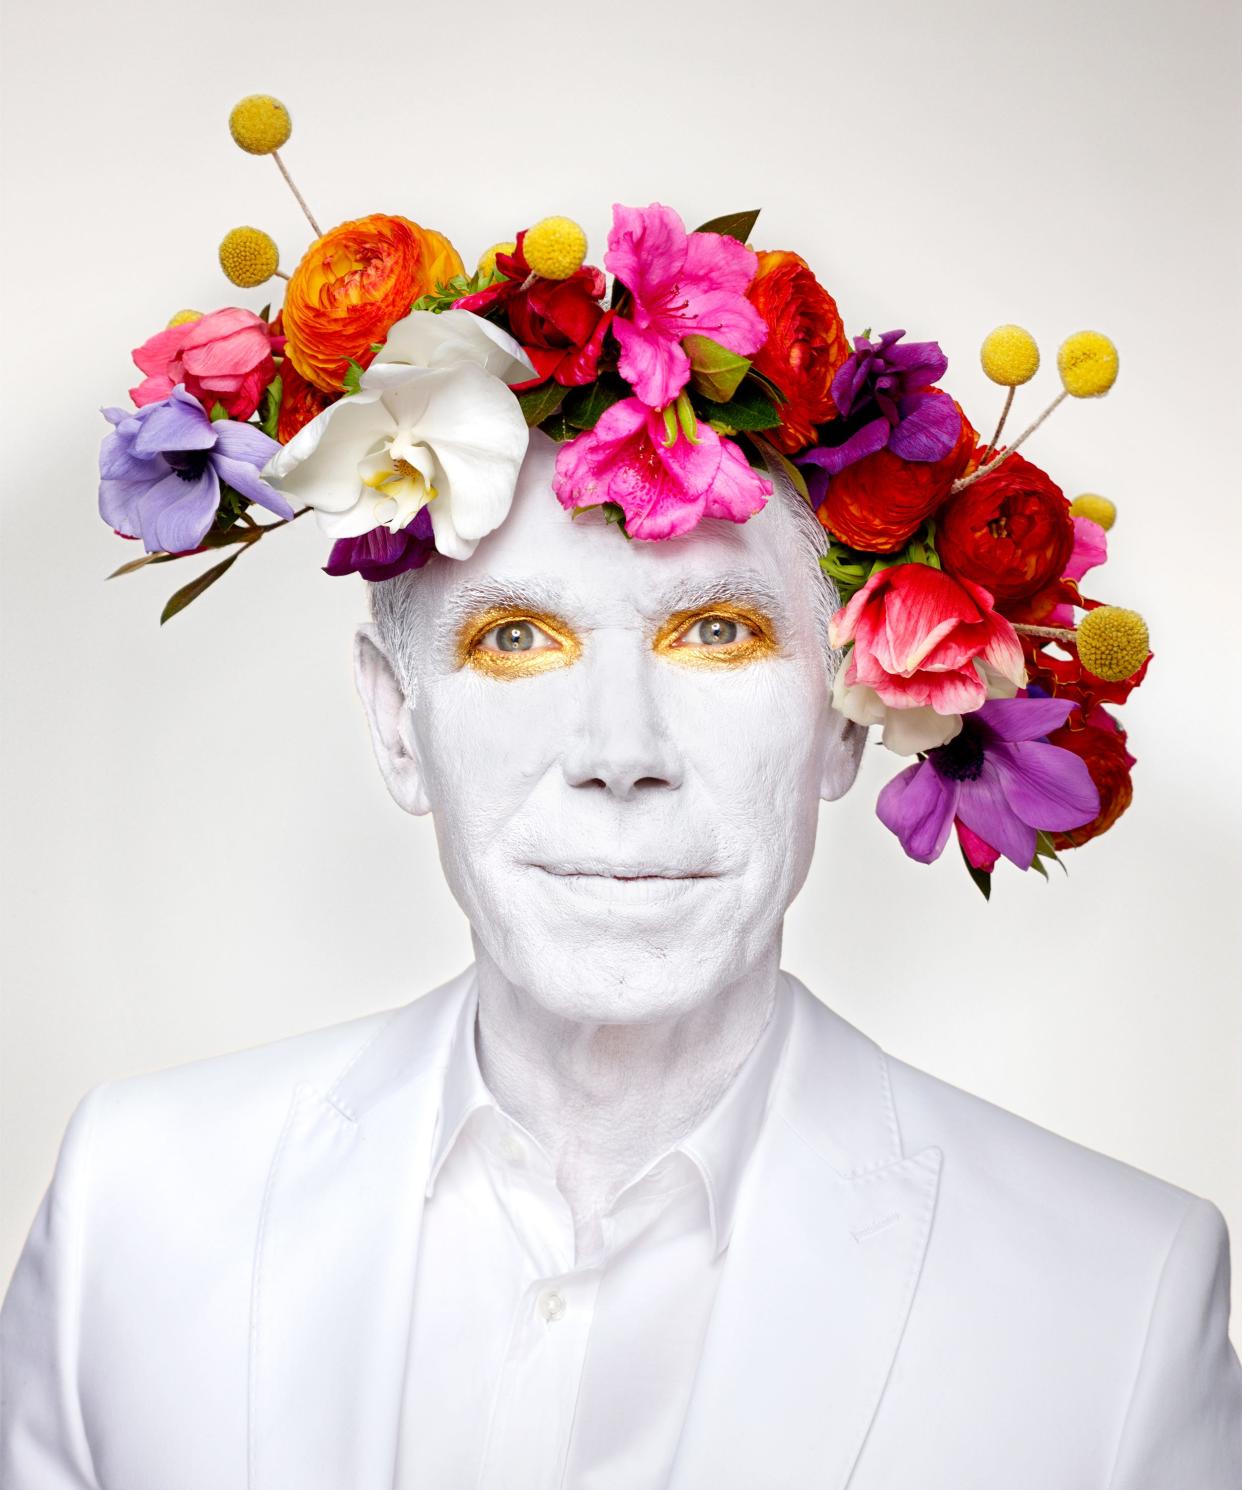 A photo by Martin Schoeller of the artist Jeff Koons wearing a floral headpiece is one of the images featured in the exhibition “Flora Imaginaria: The Flower in Contemporary Photography” at Selby Gardens.